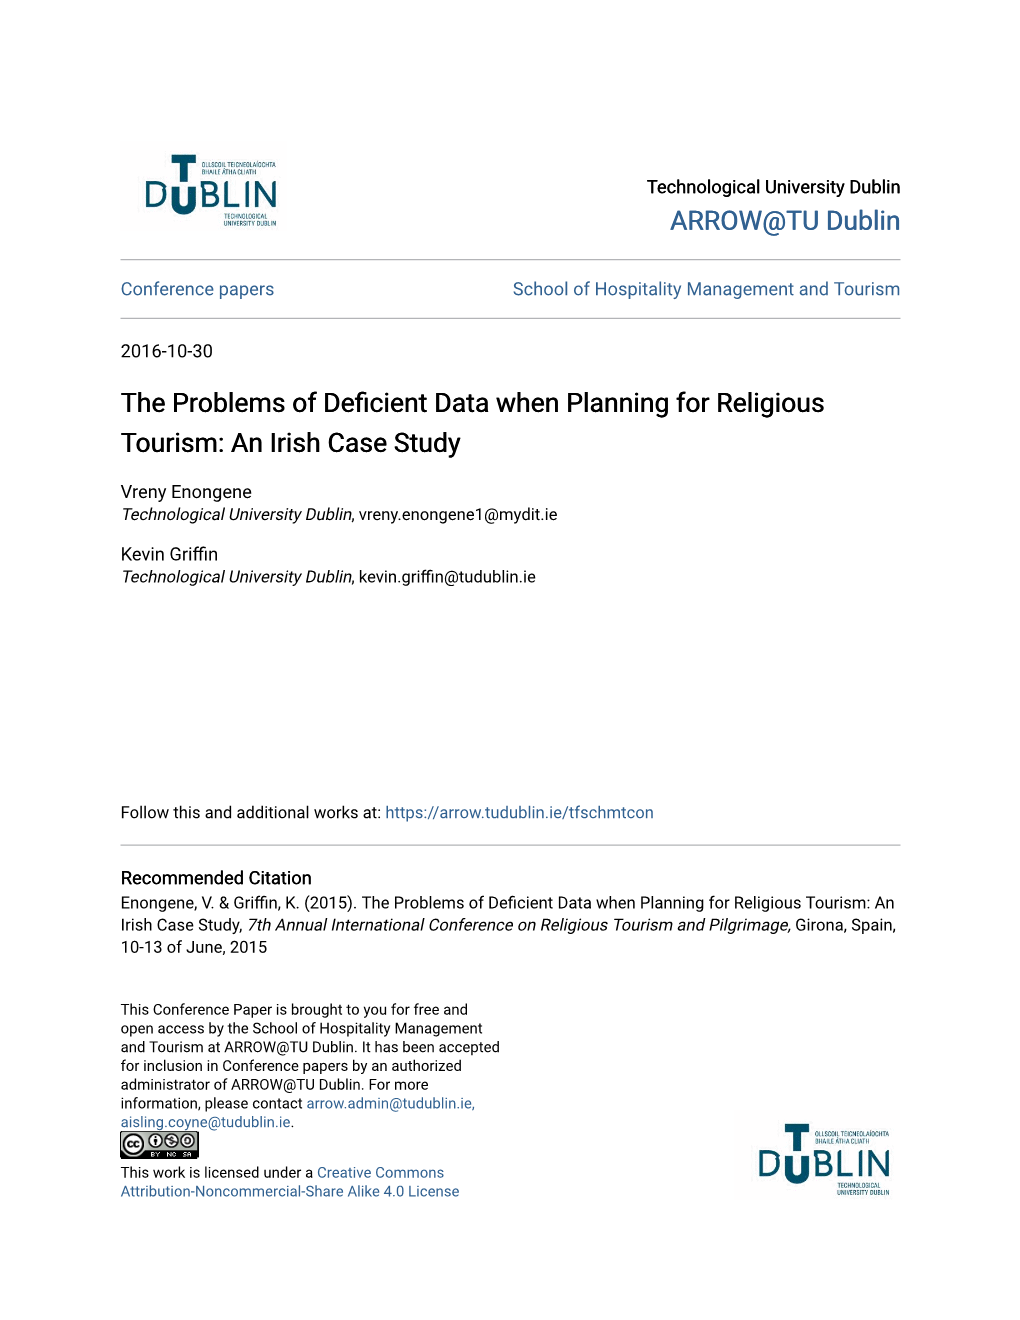 The Problems of Deficient Data When Planning for Religious Tourism: an Irish Case Study